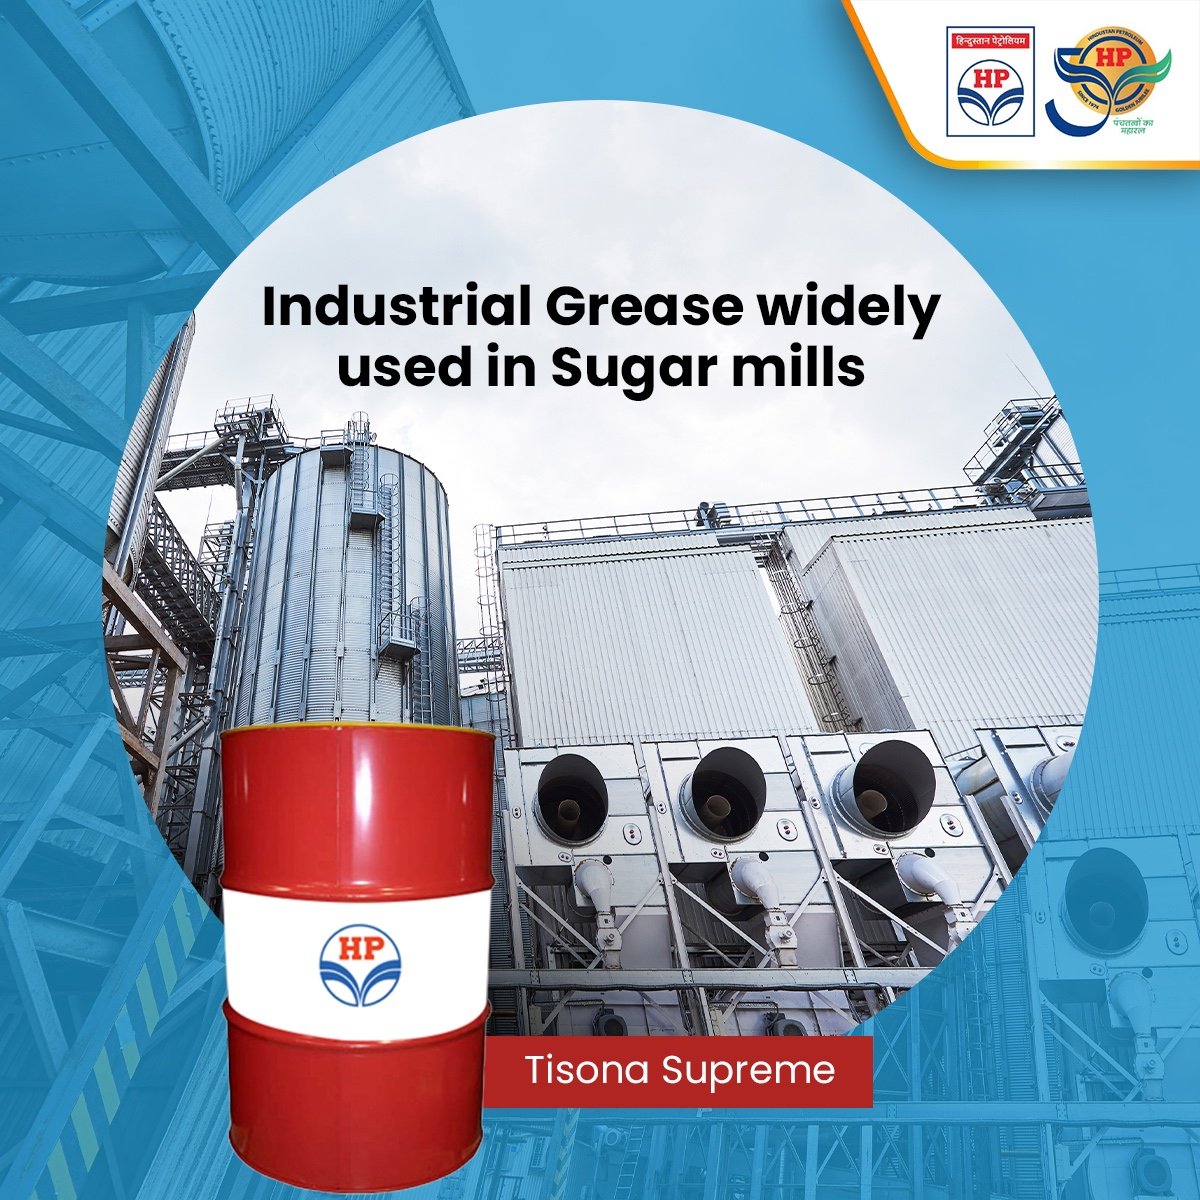 One of the best Industrial Grease, Tisona Supreme is formulated especially for Sugar mills bearing lubrications.
 
#TisonaSupreme #HPCL #DeliveringHappiness #HPTowardsGoldenHorizon